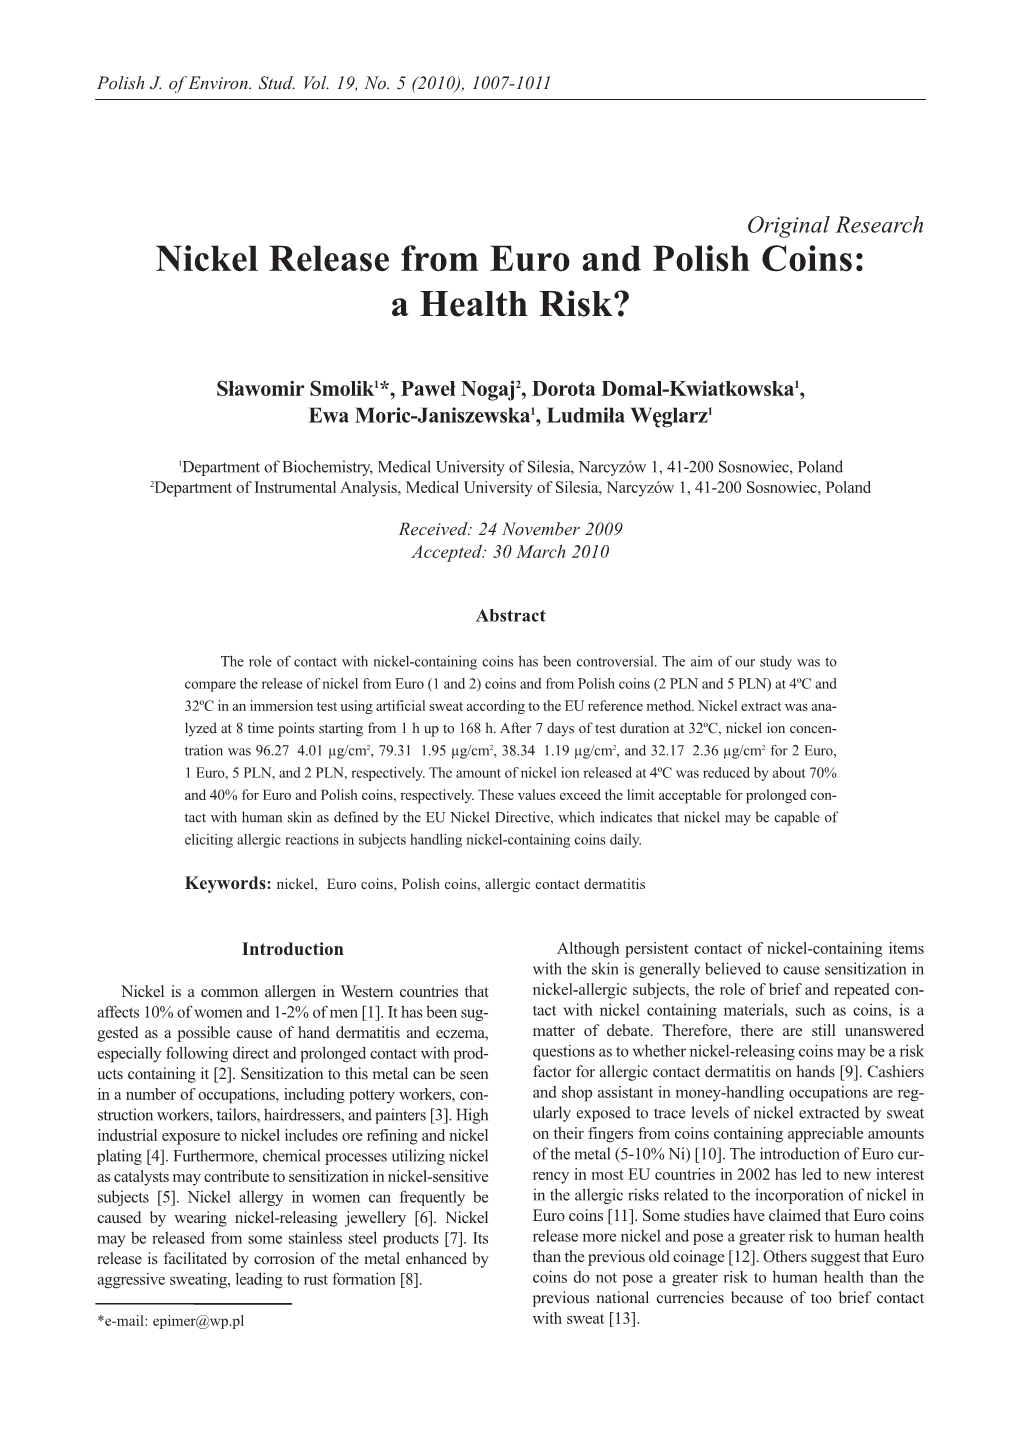 Nickel Release from Euro and Polish Coins: a Health Risk?